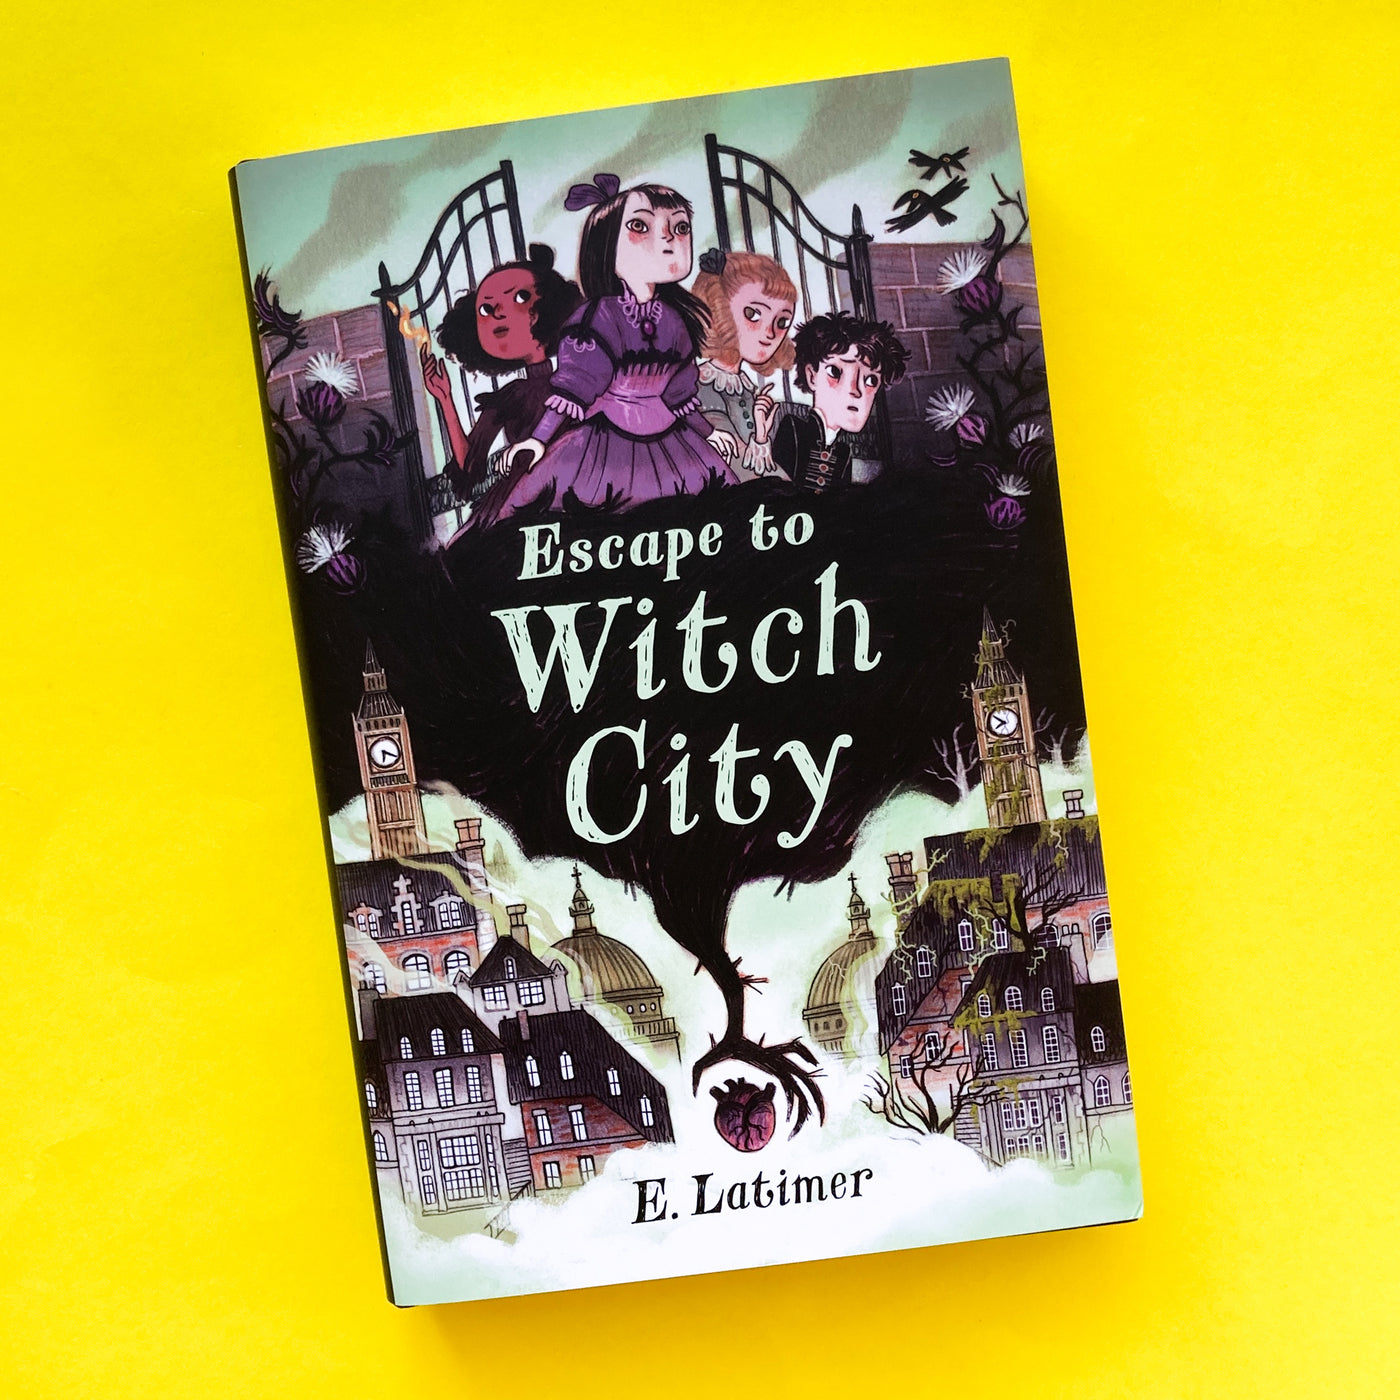 Escape to Witch City by E. Latimer